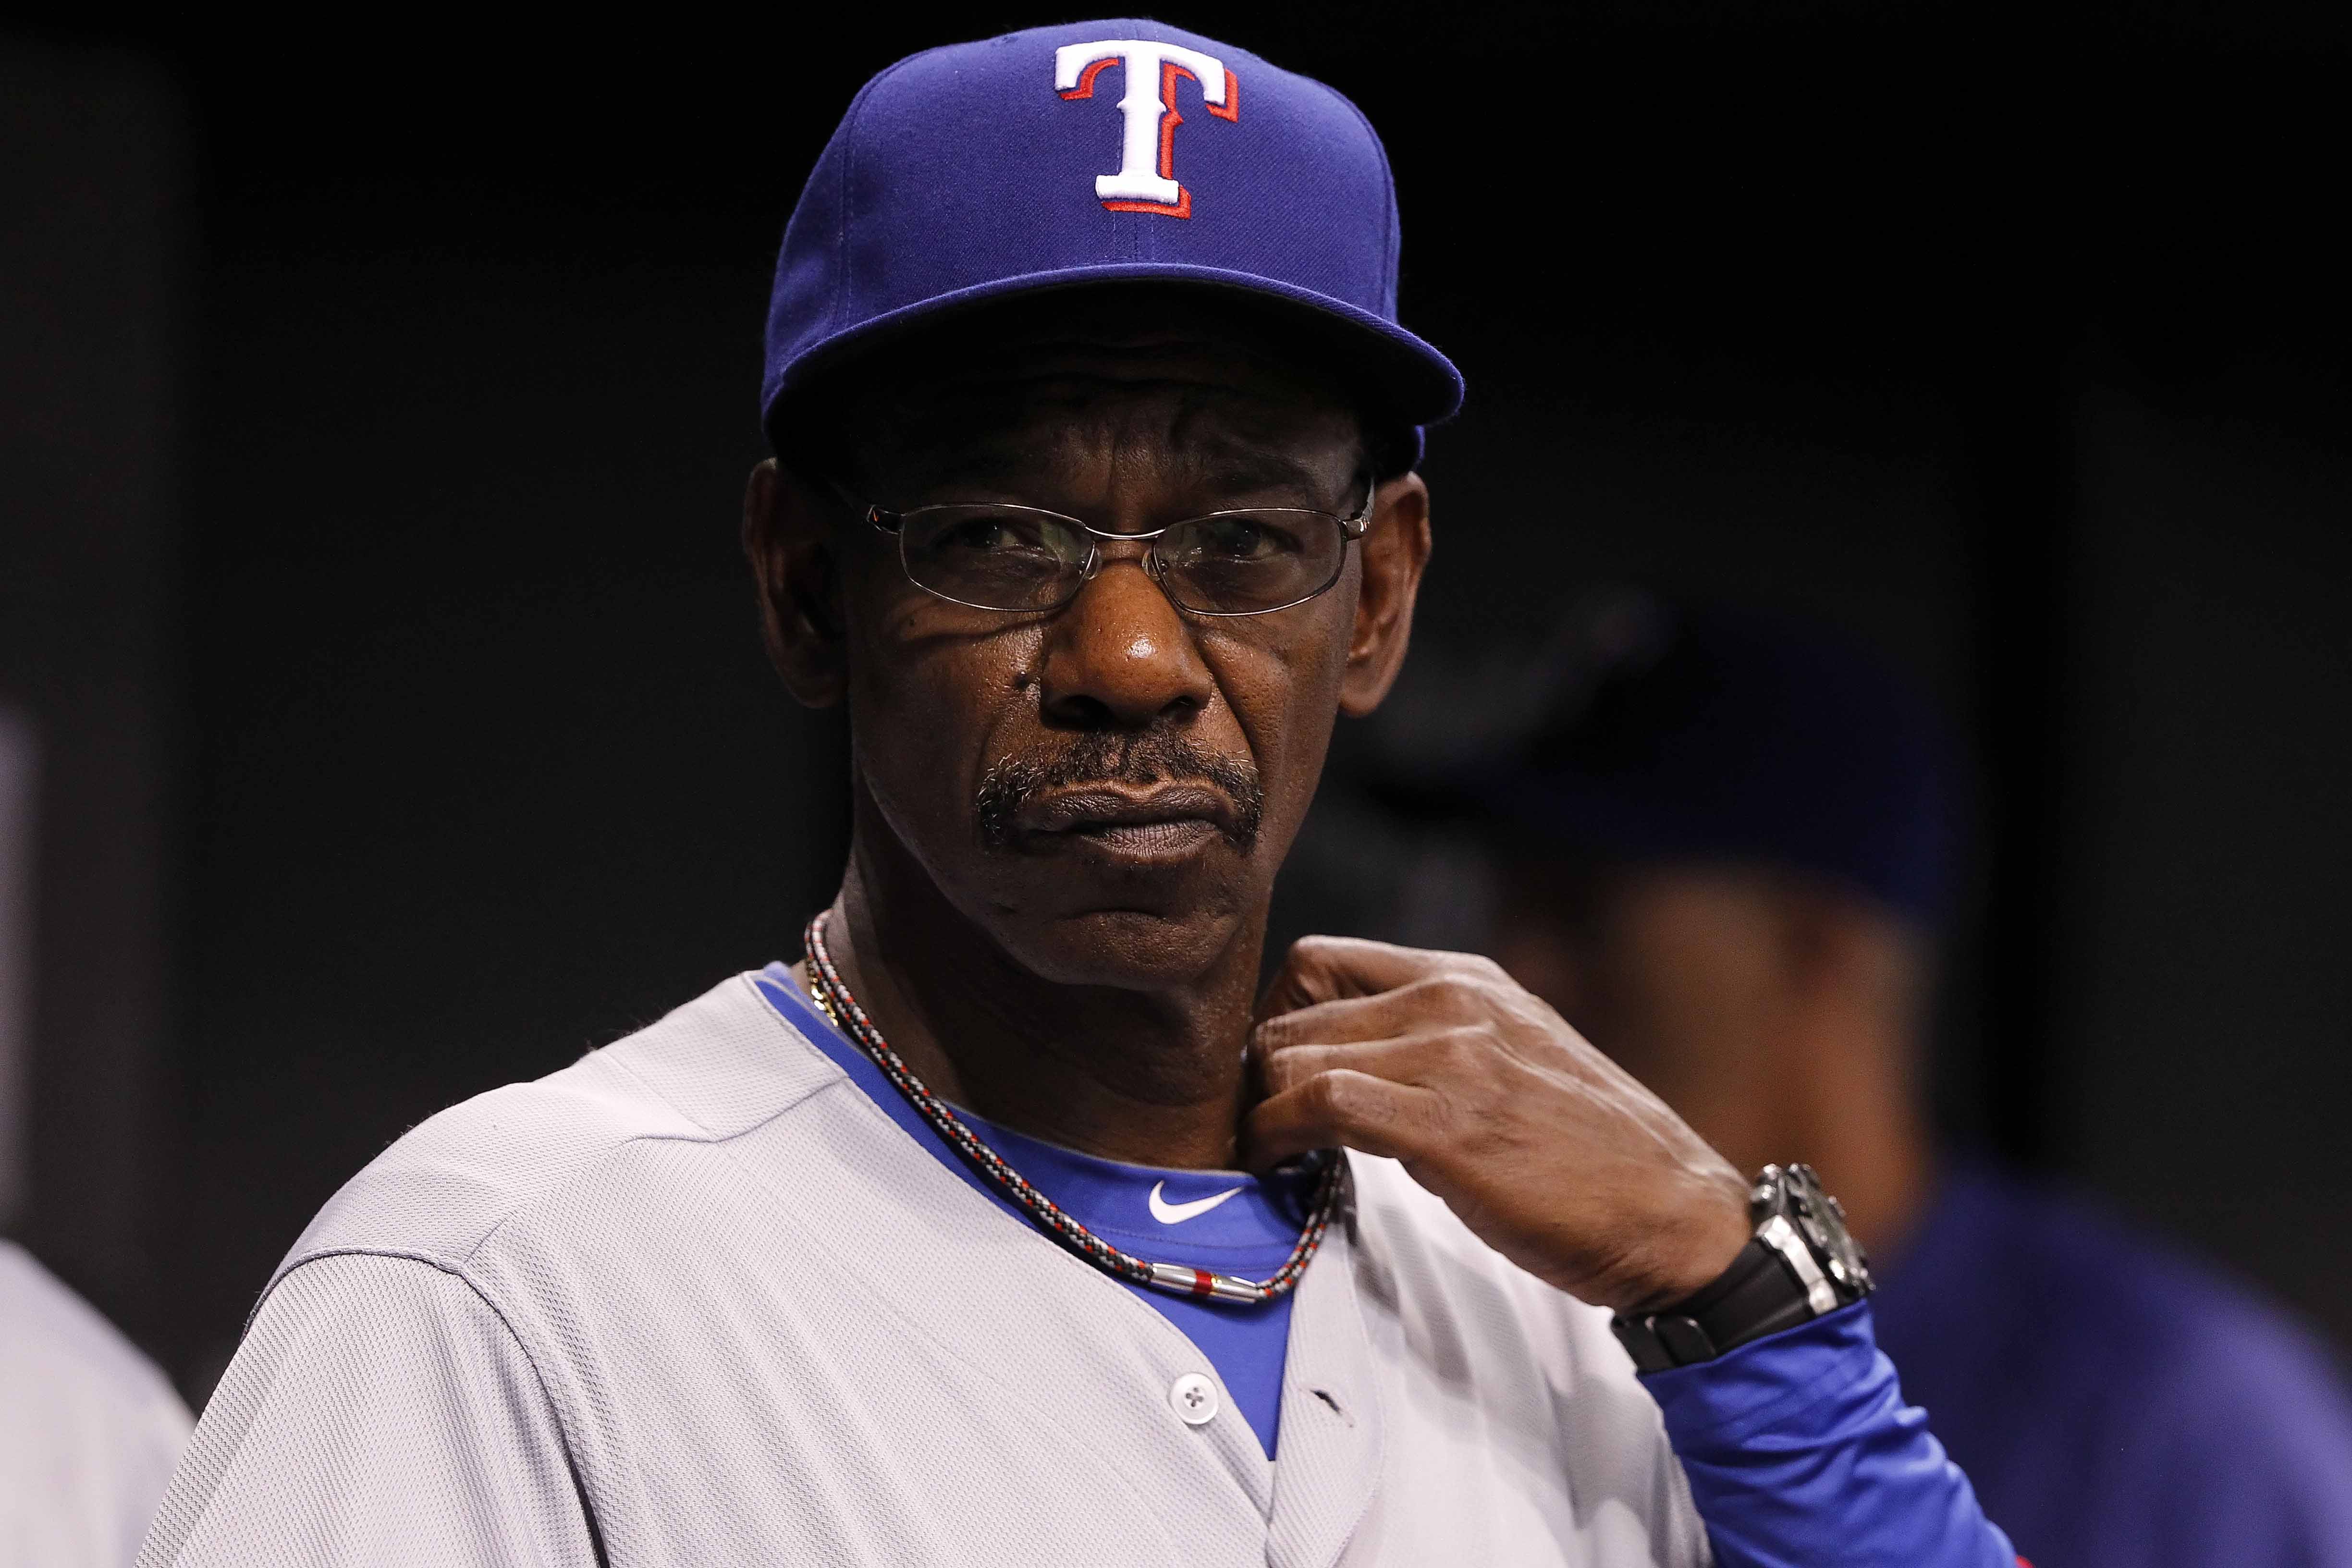 The Texas Rangers could bring Ron Washington back, but should they?